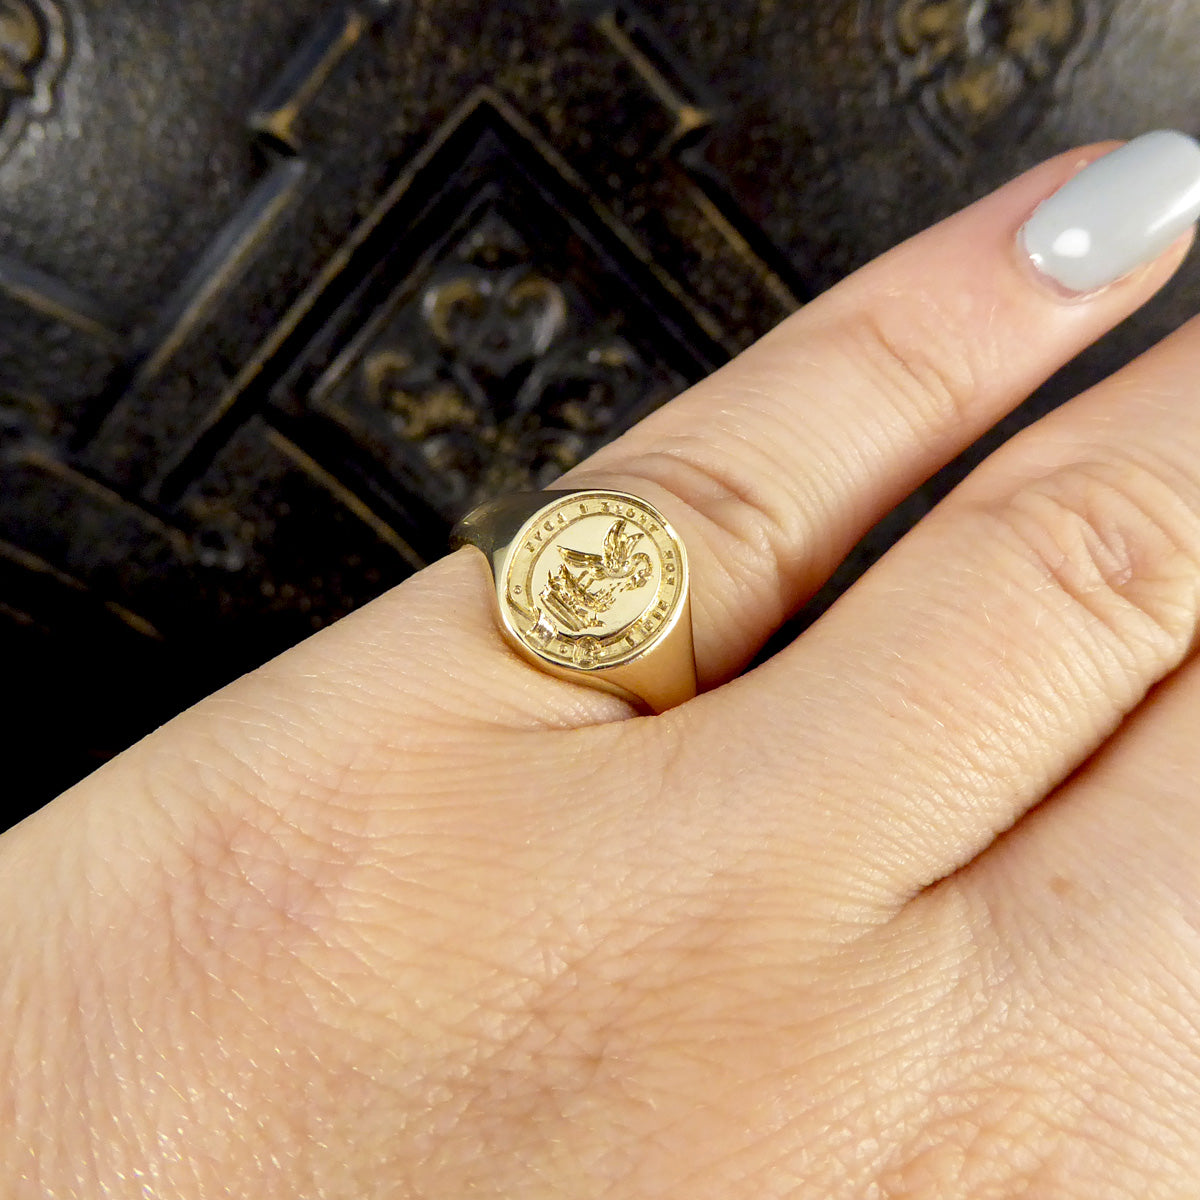 "I Die For Those I Love" Crested Signet Ring in Yellow Gold